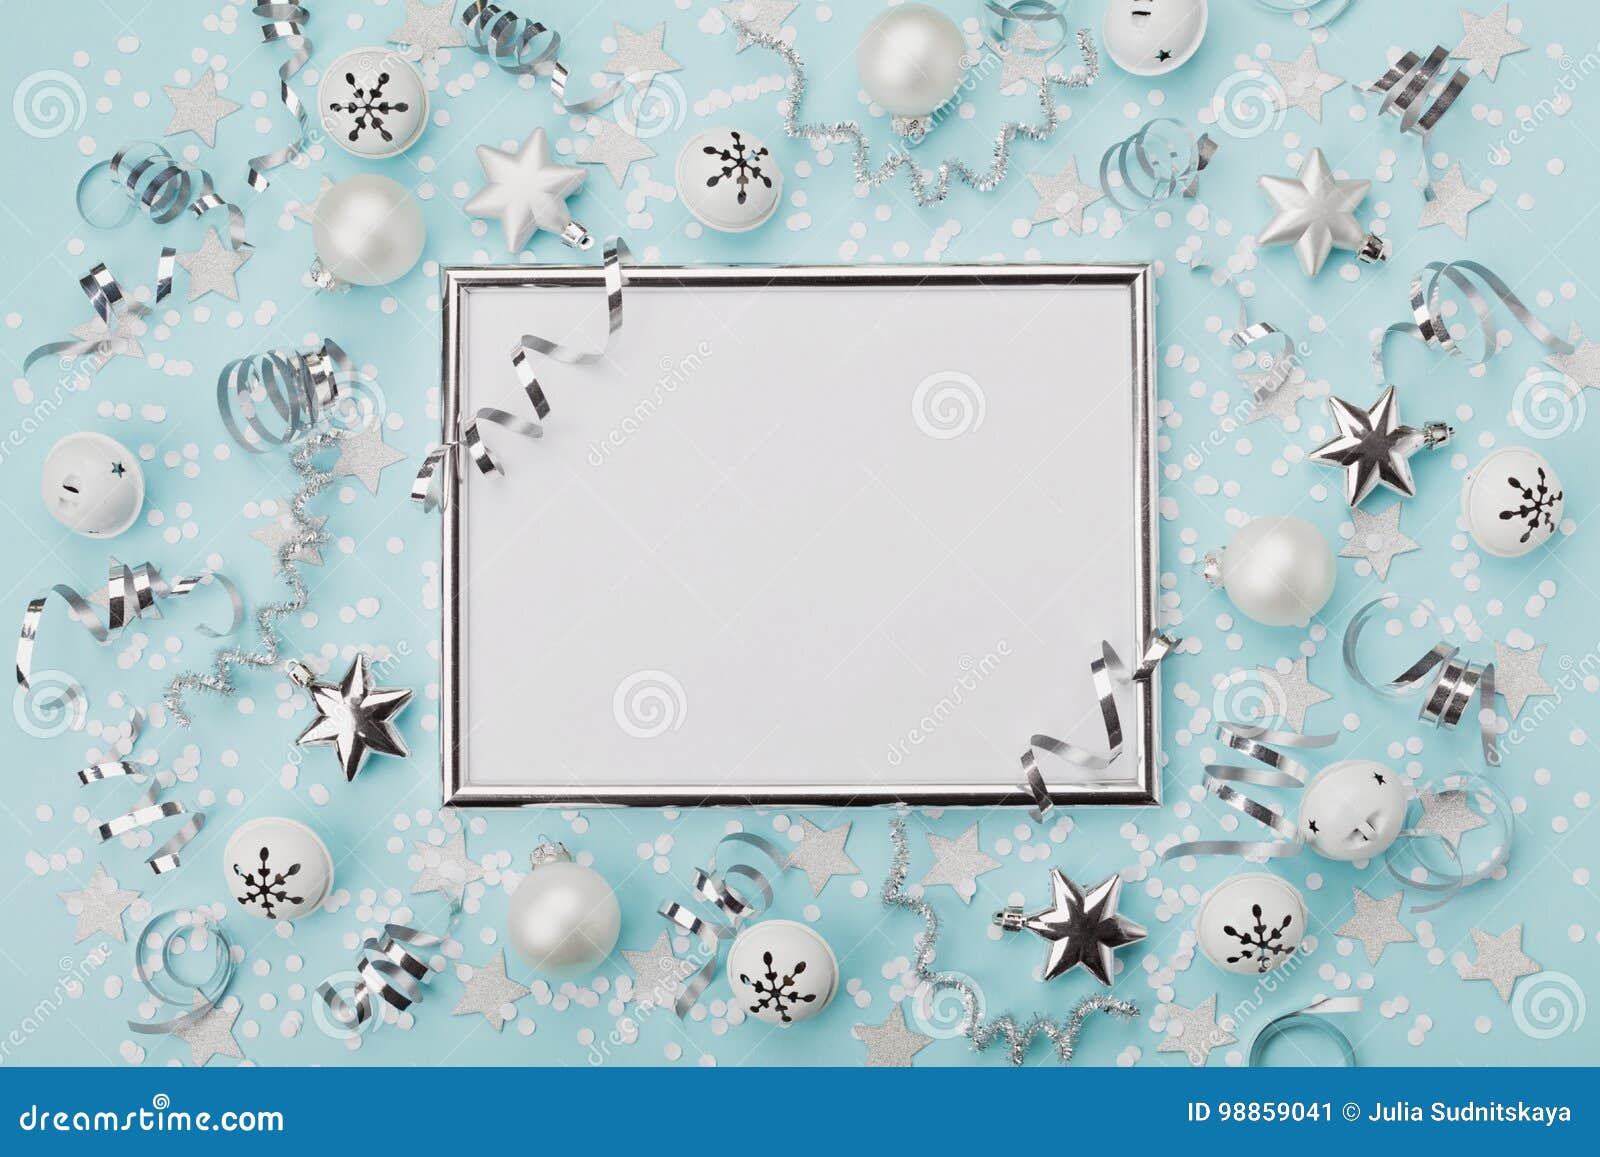 Party carnival christmas background decorated silver frame with confetti balls and star on turquoise desk top view Flat lay Holiday mockup invitation